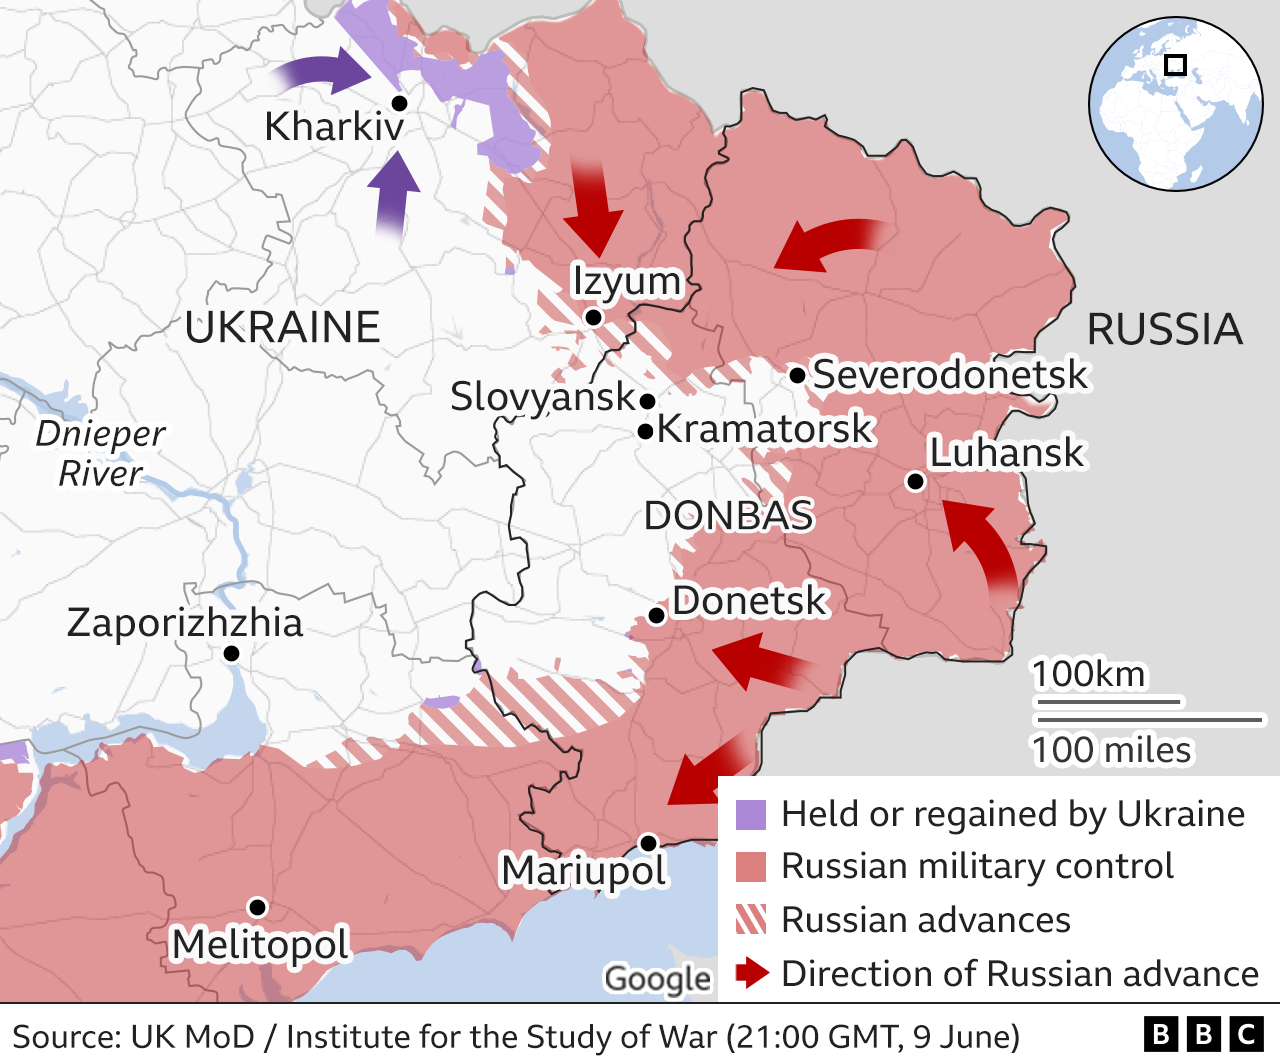 Map of eastern Ukraine, showing Russian areas of control, updated 10 June